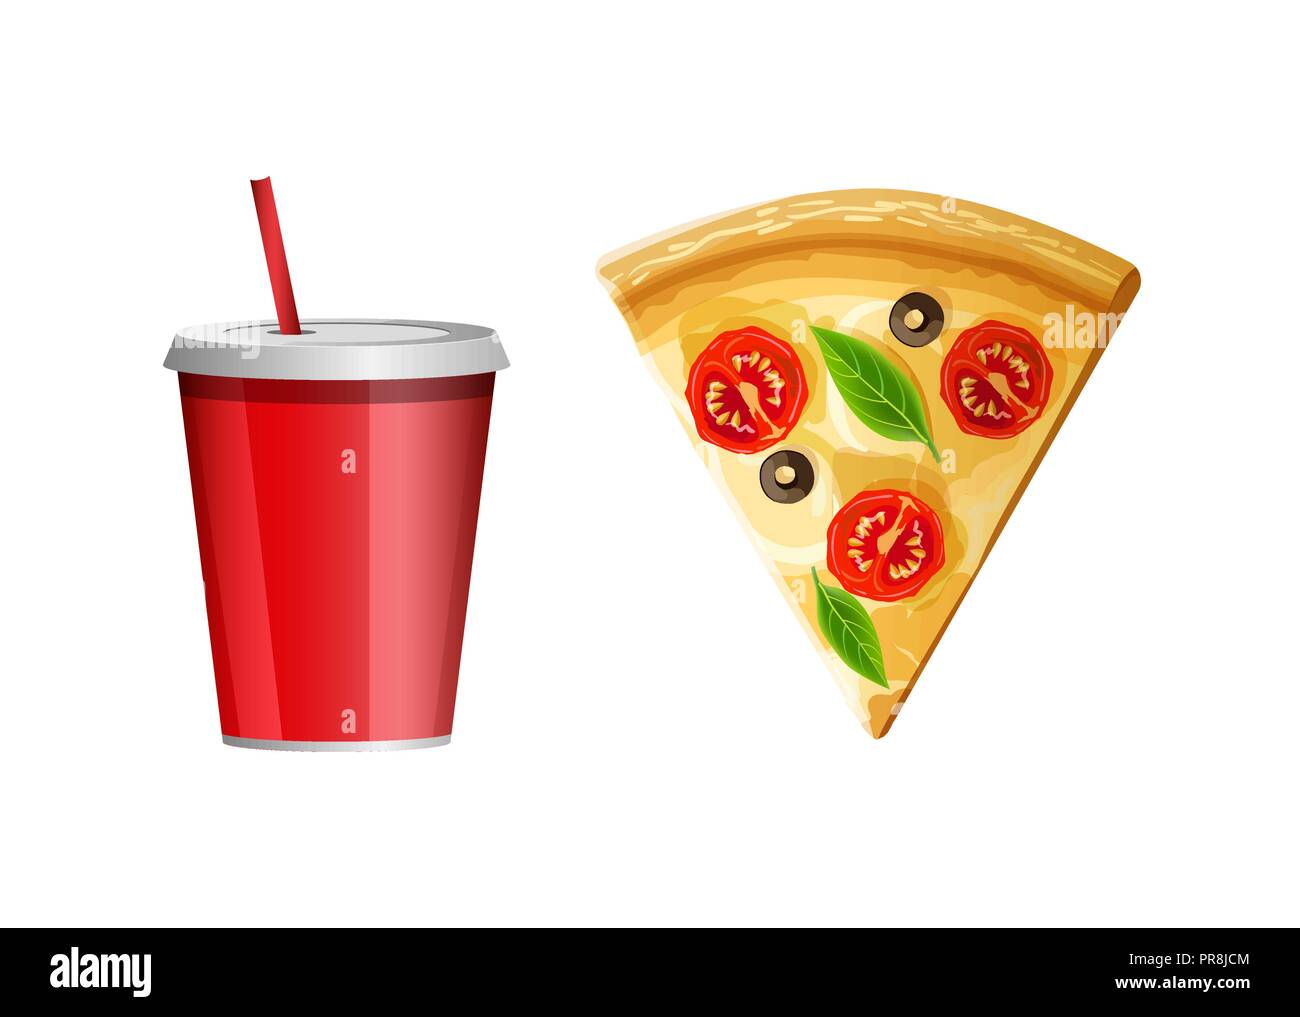 Fast food icon, piece of pizza and soda water cup Stock Vector